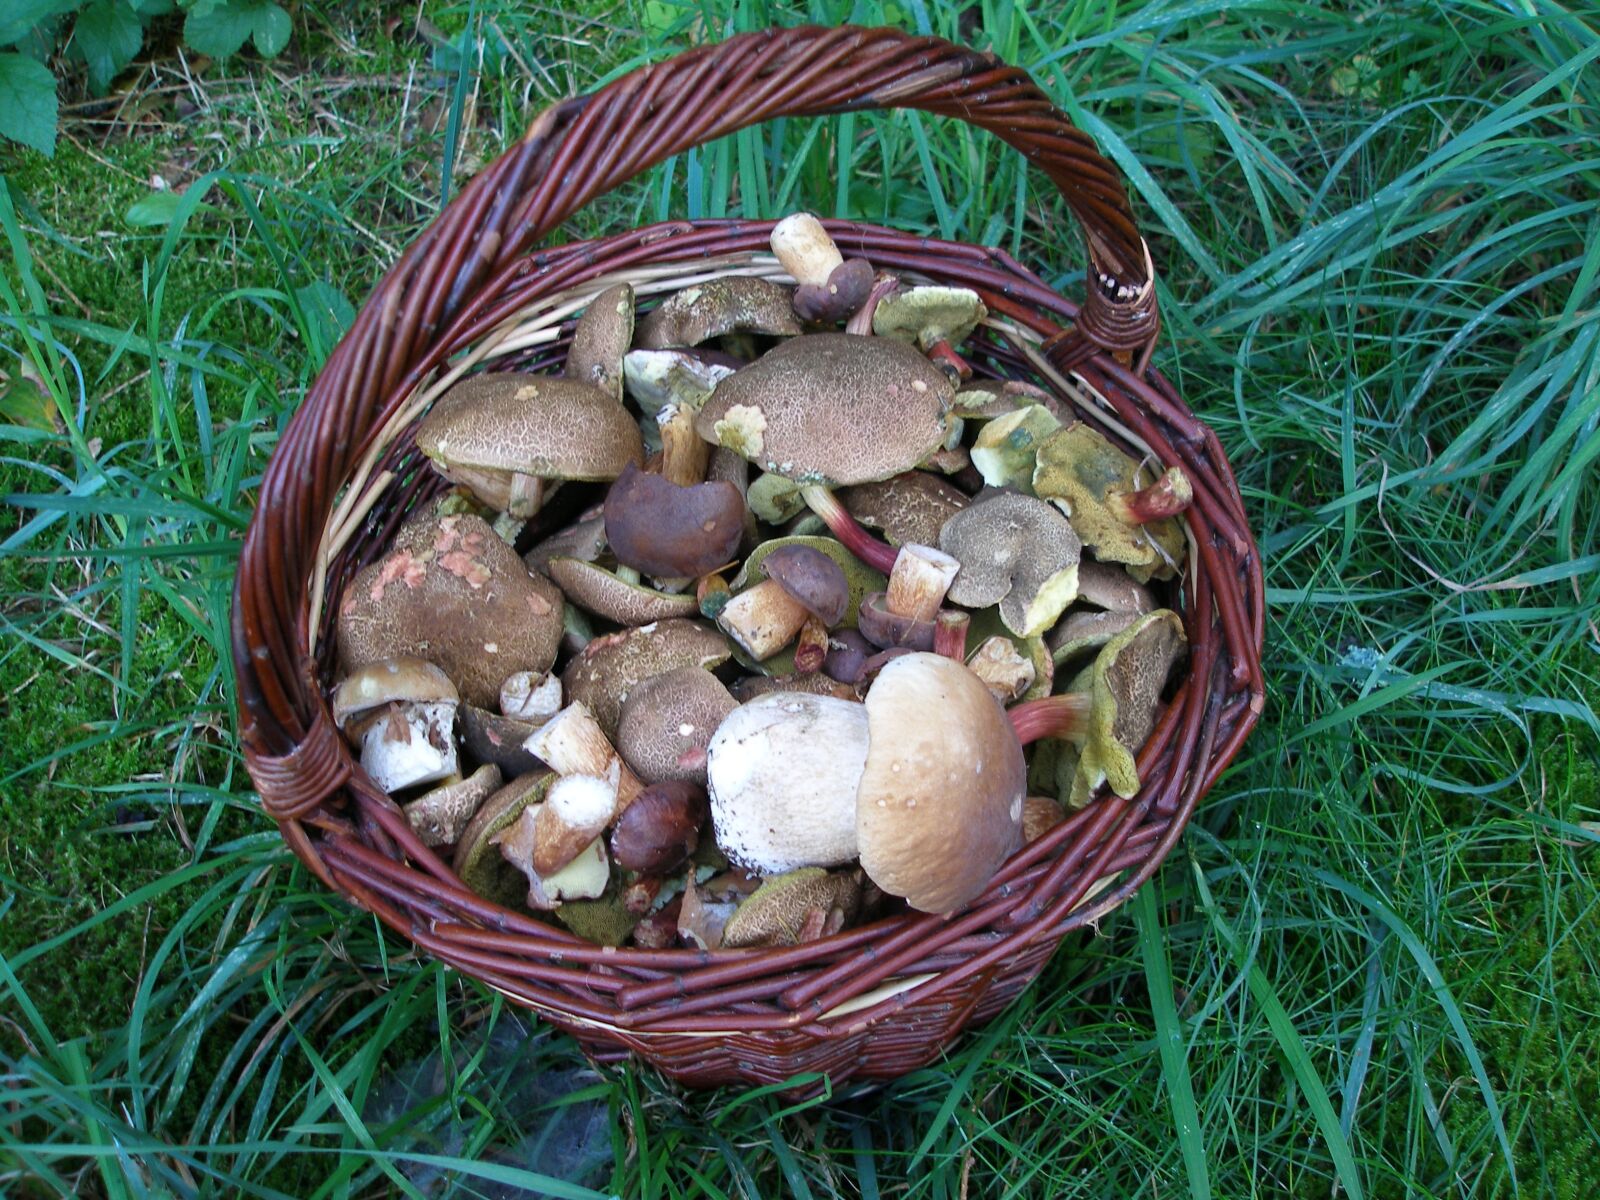 Olympus SP350 sample photo. Mushrooms, forest, basket of photography